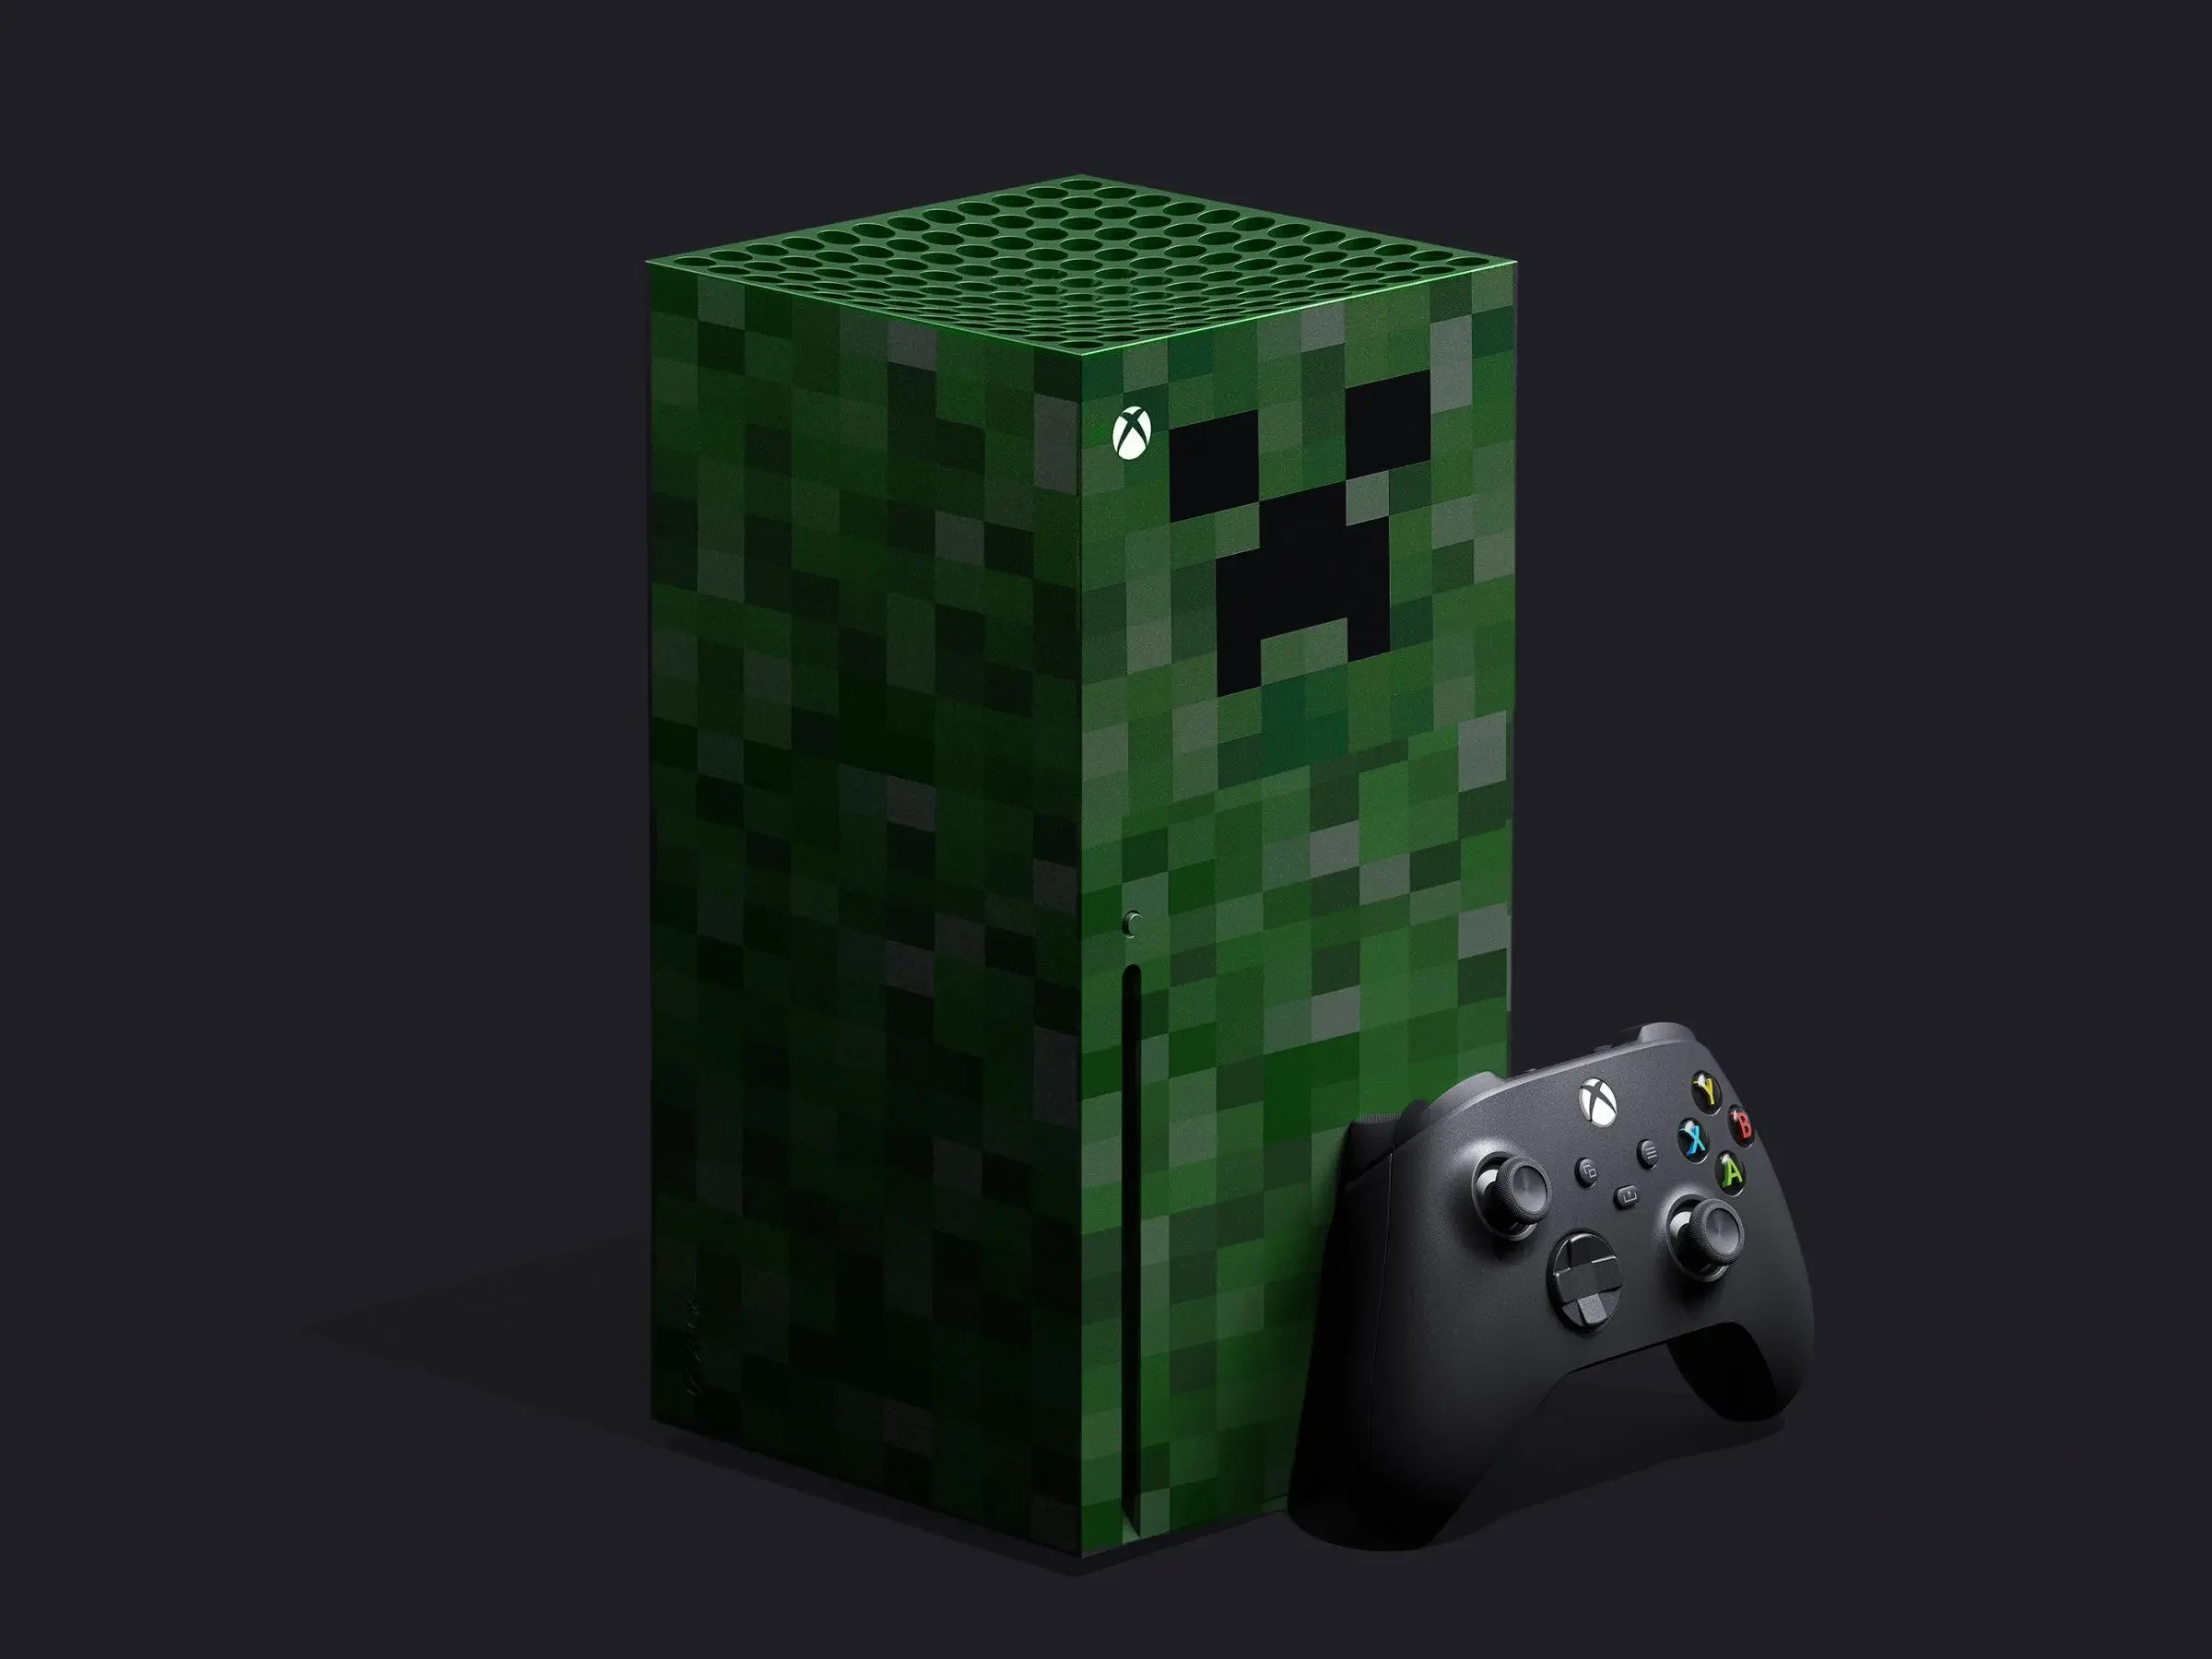 Microsoft is about to release Minecraft on the Xbox Series